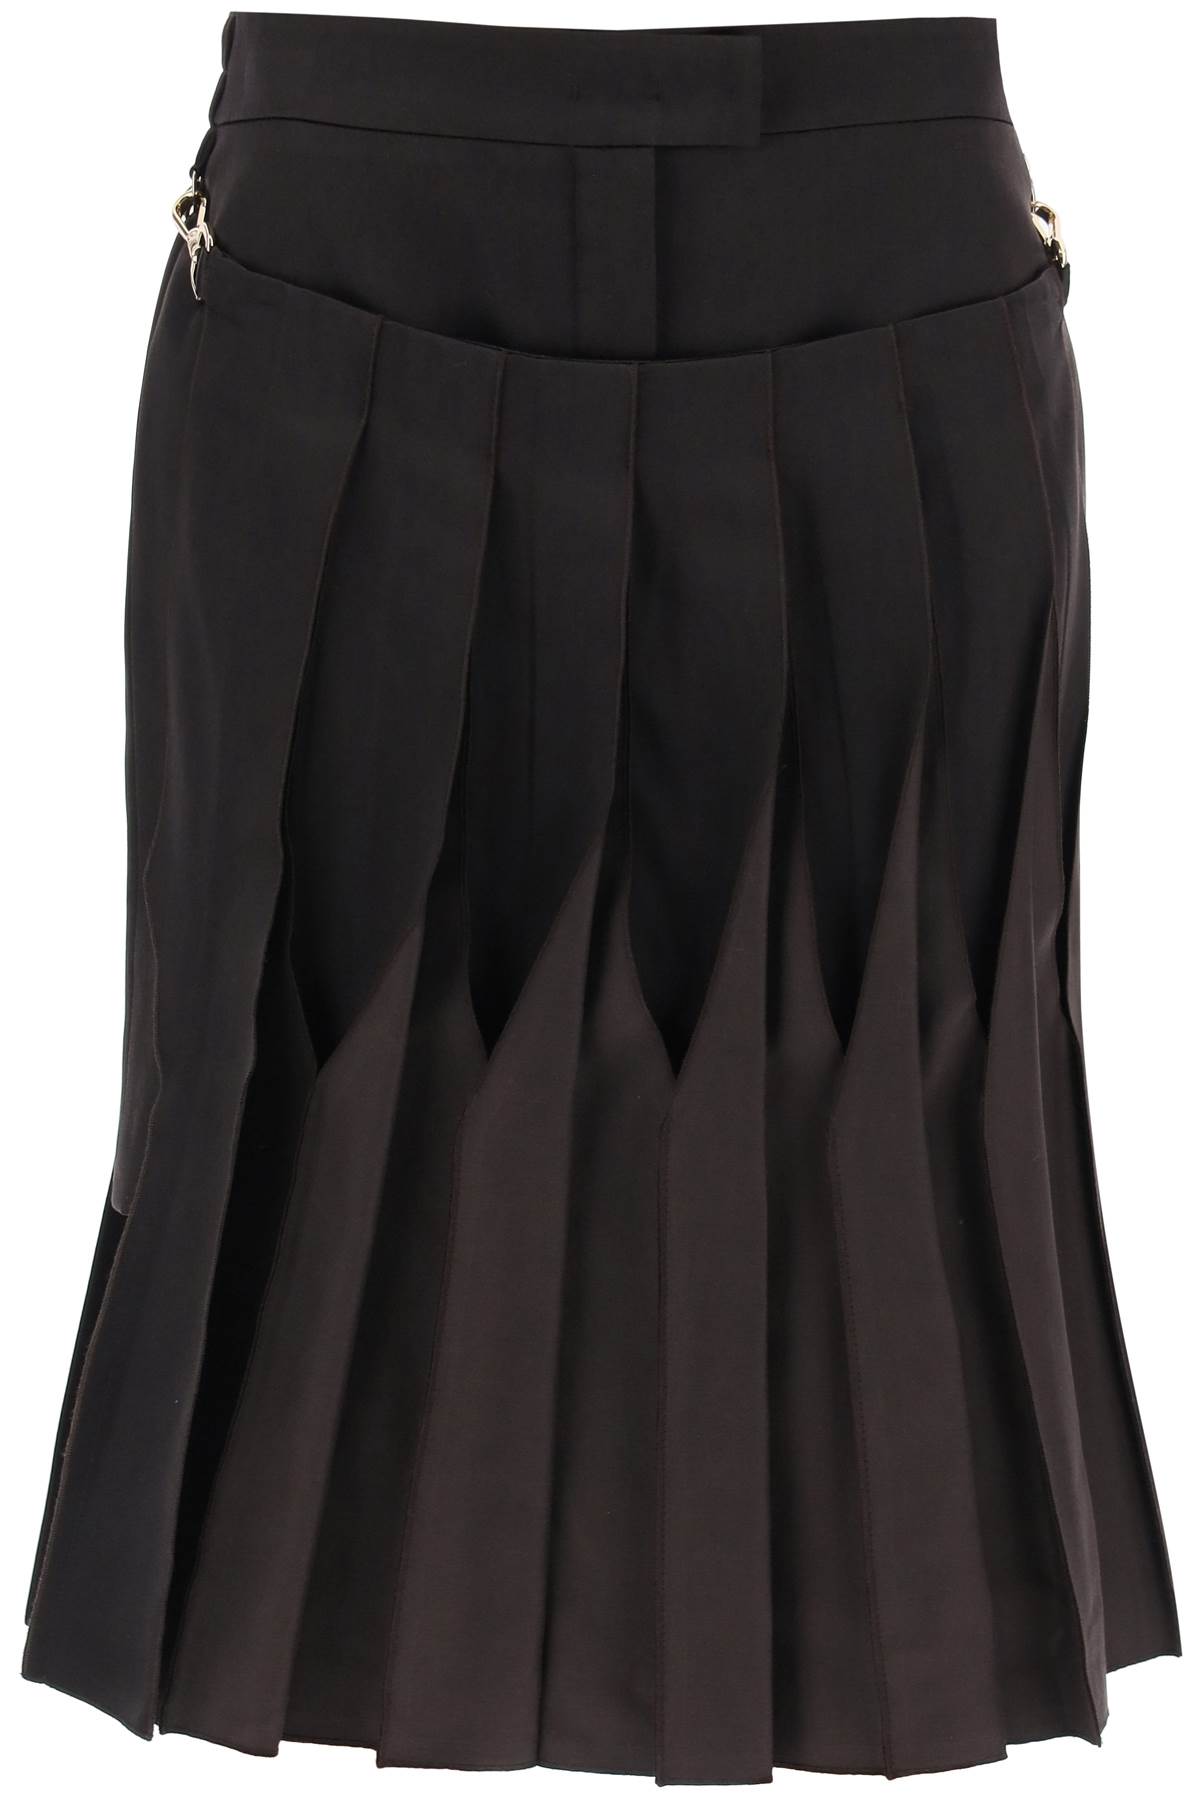 Fendi Duchesse Skirt With Pleated Panel In Brown